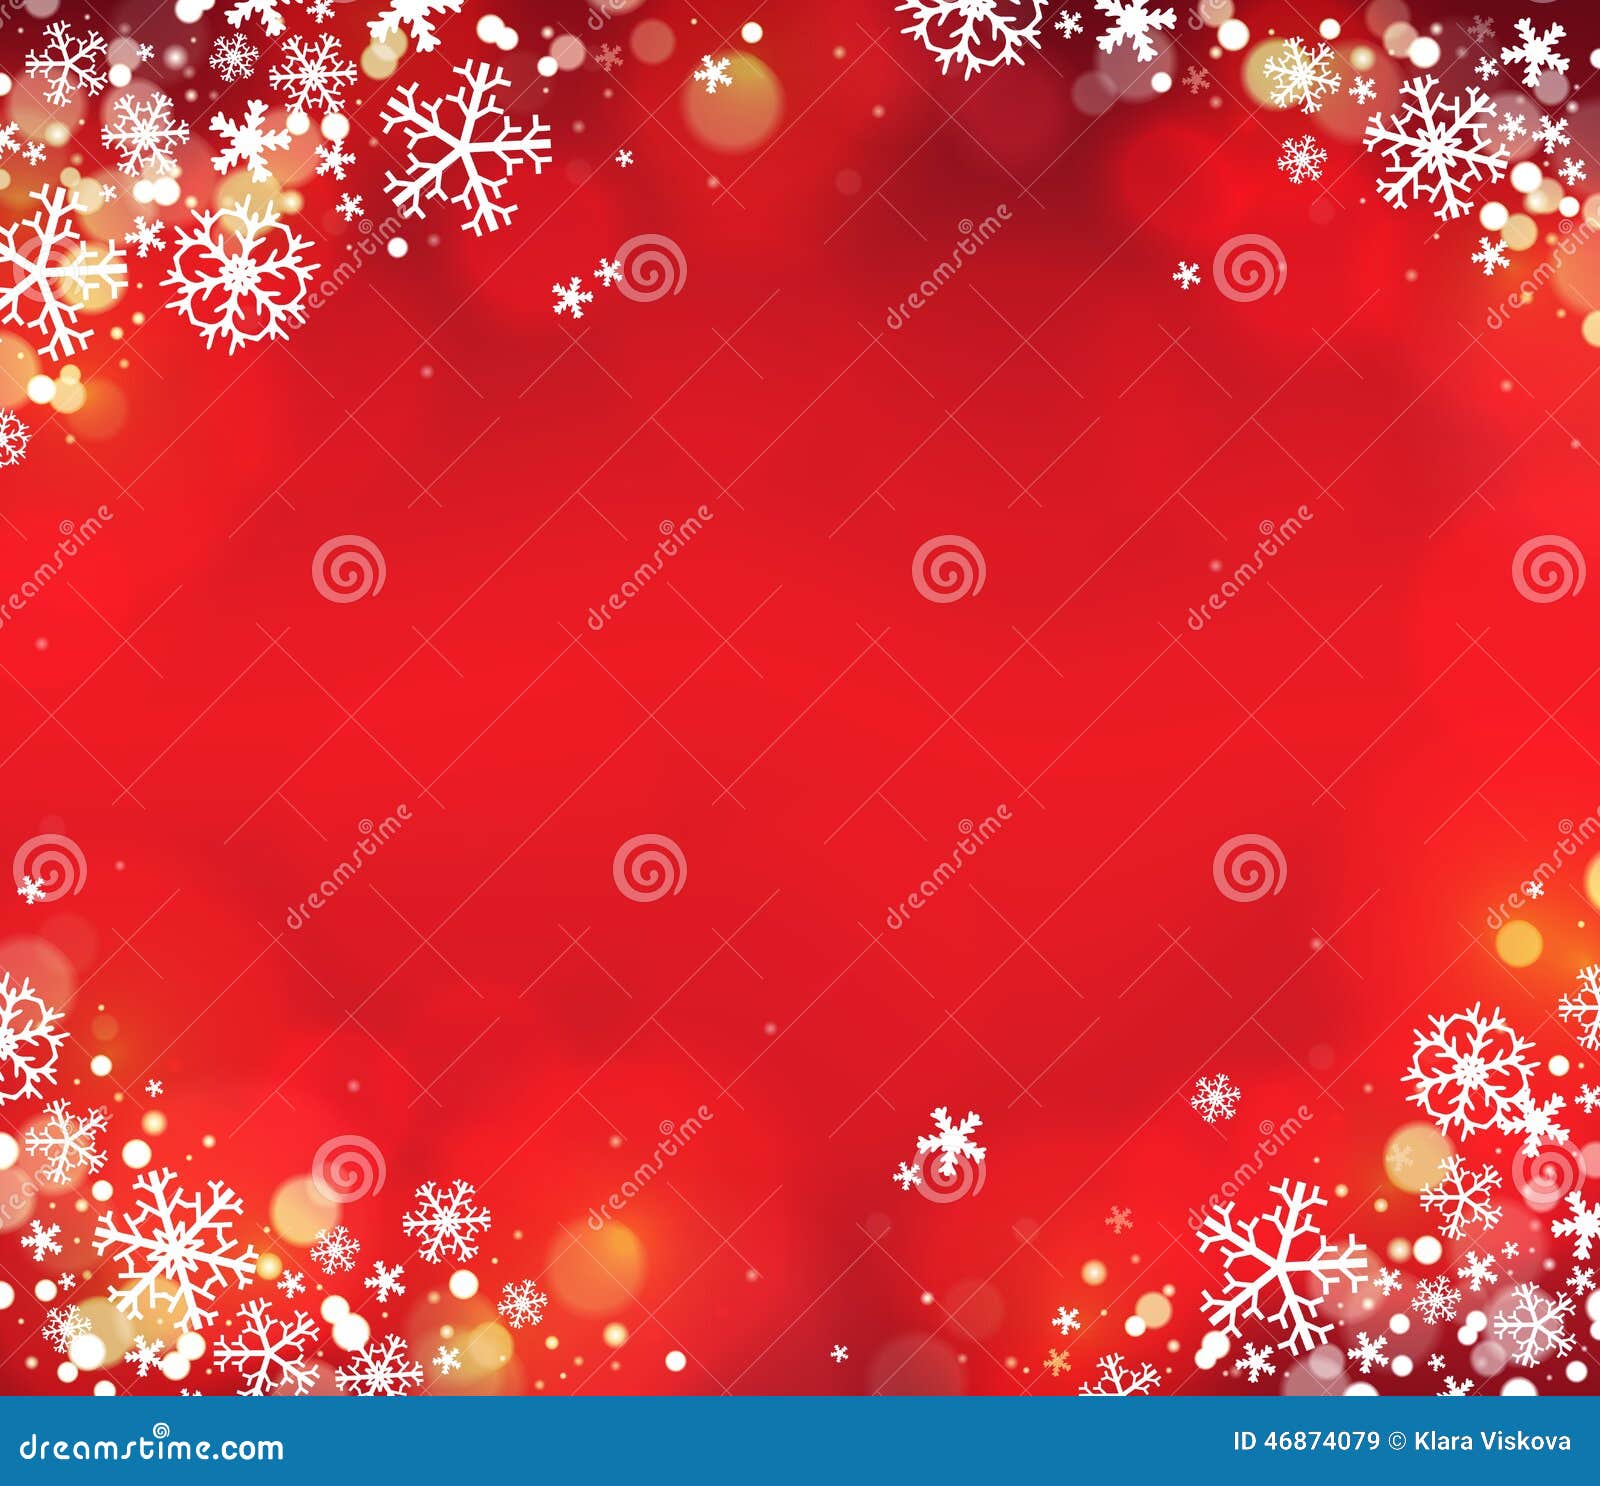 Snowflake Theme Background 7 Stock Vector - Illustration of artistic ...